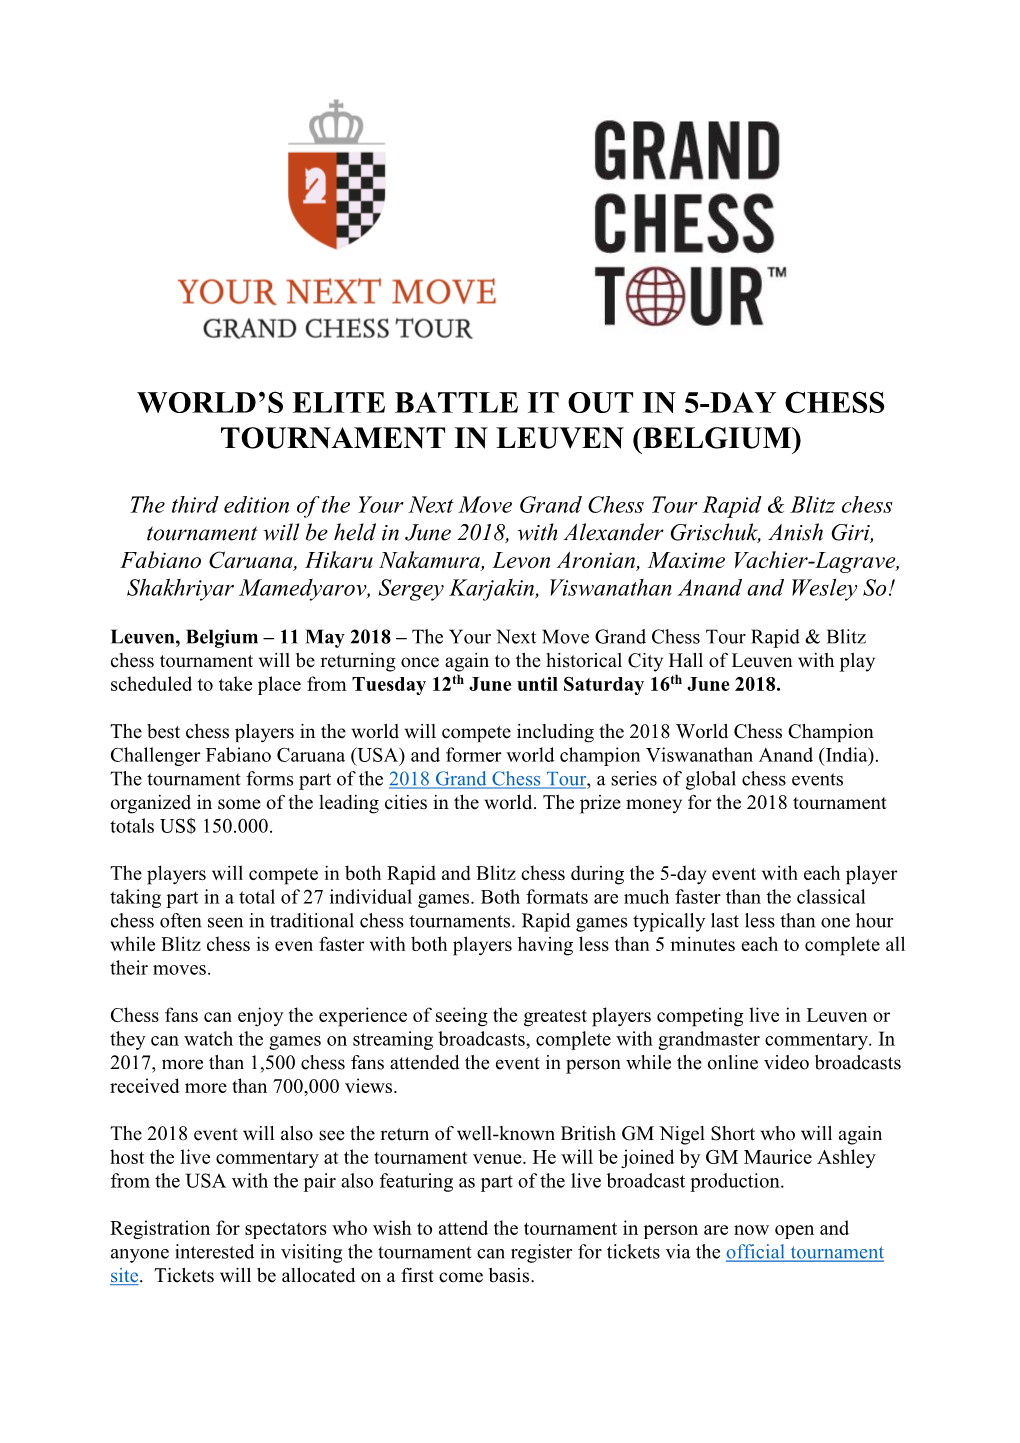 World's Elite Battle It out in 5-Day Chess